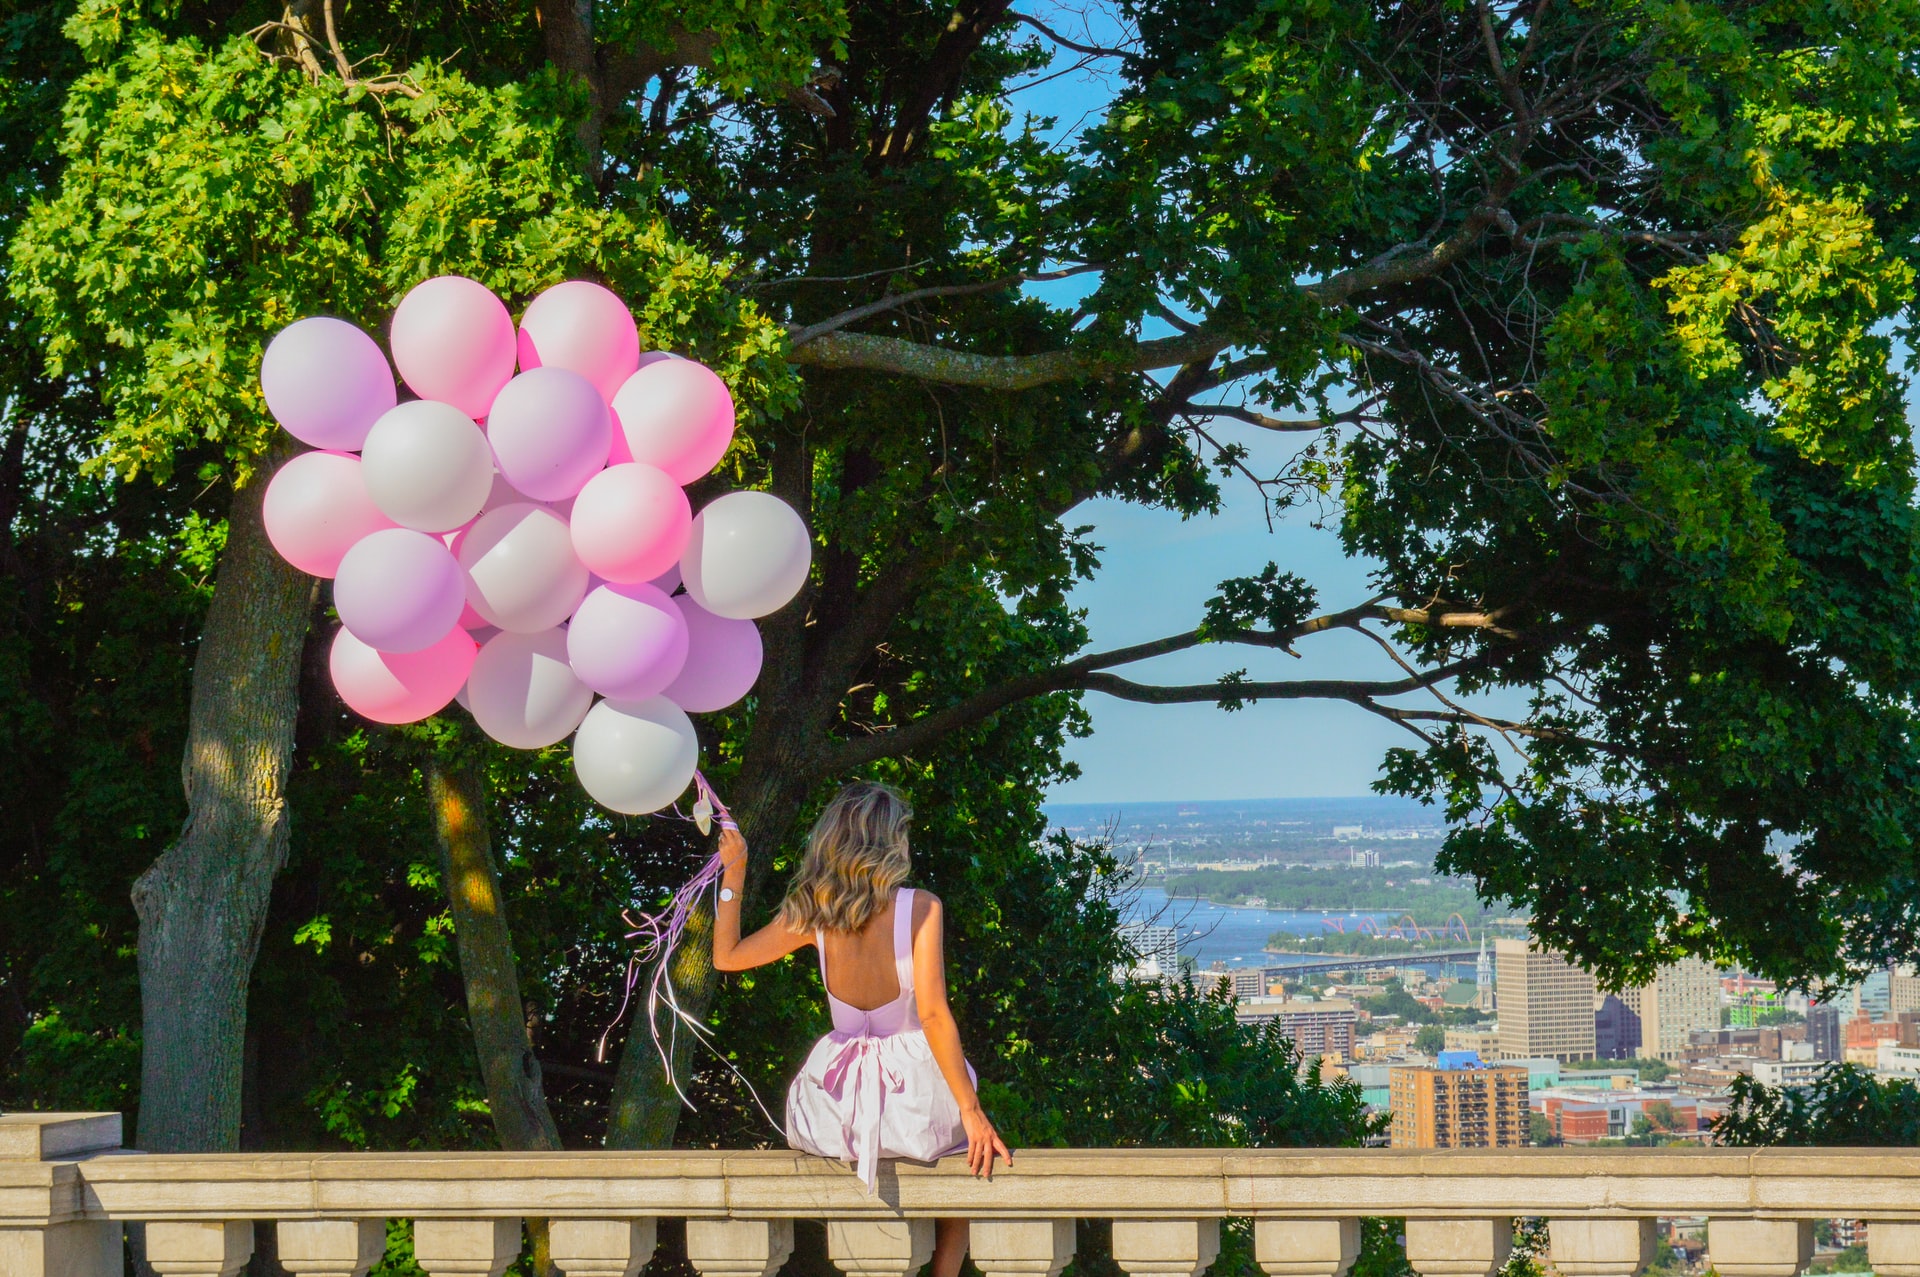 Woman in a dress holding a bunch of pink balloons, overlooking the city.